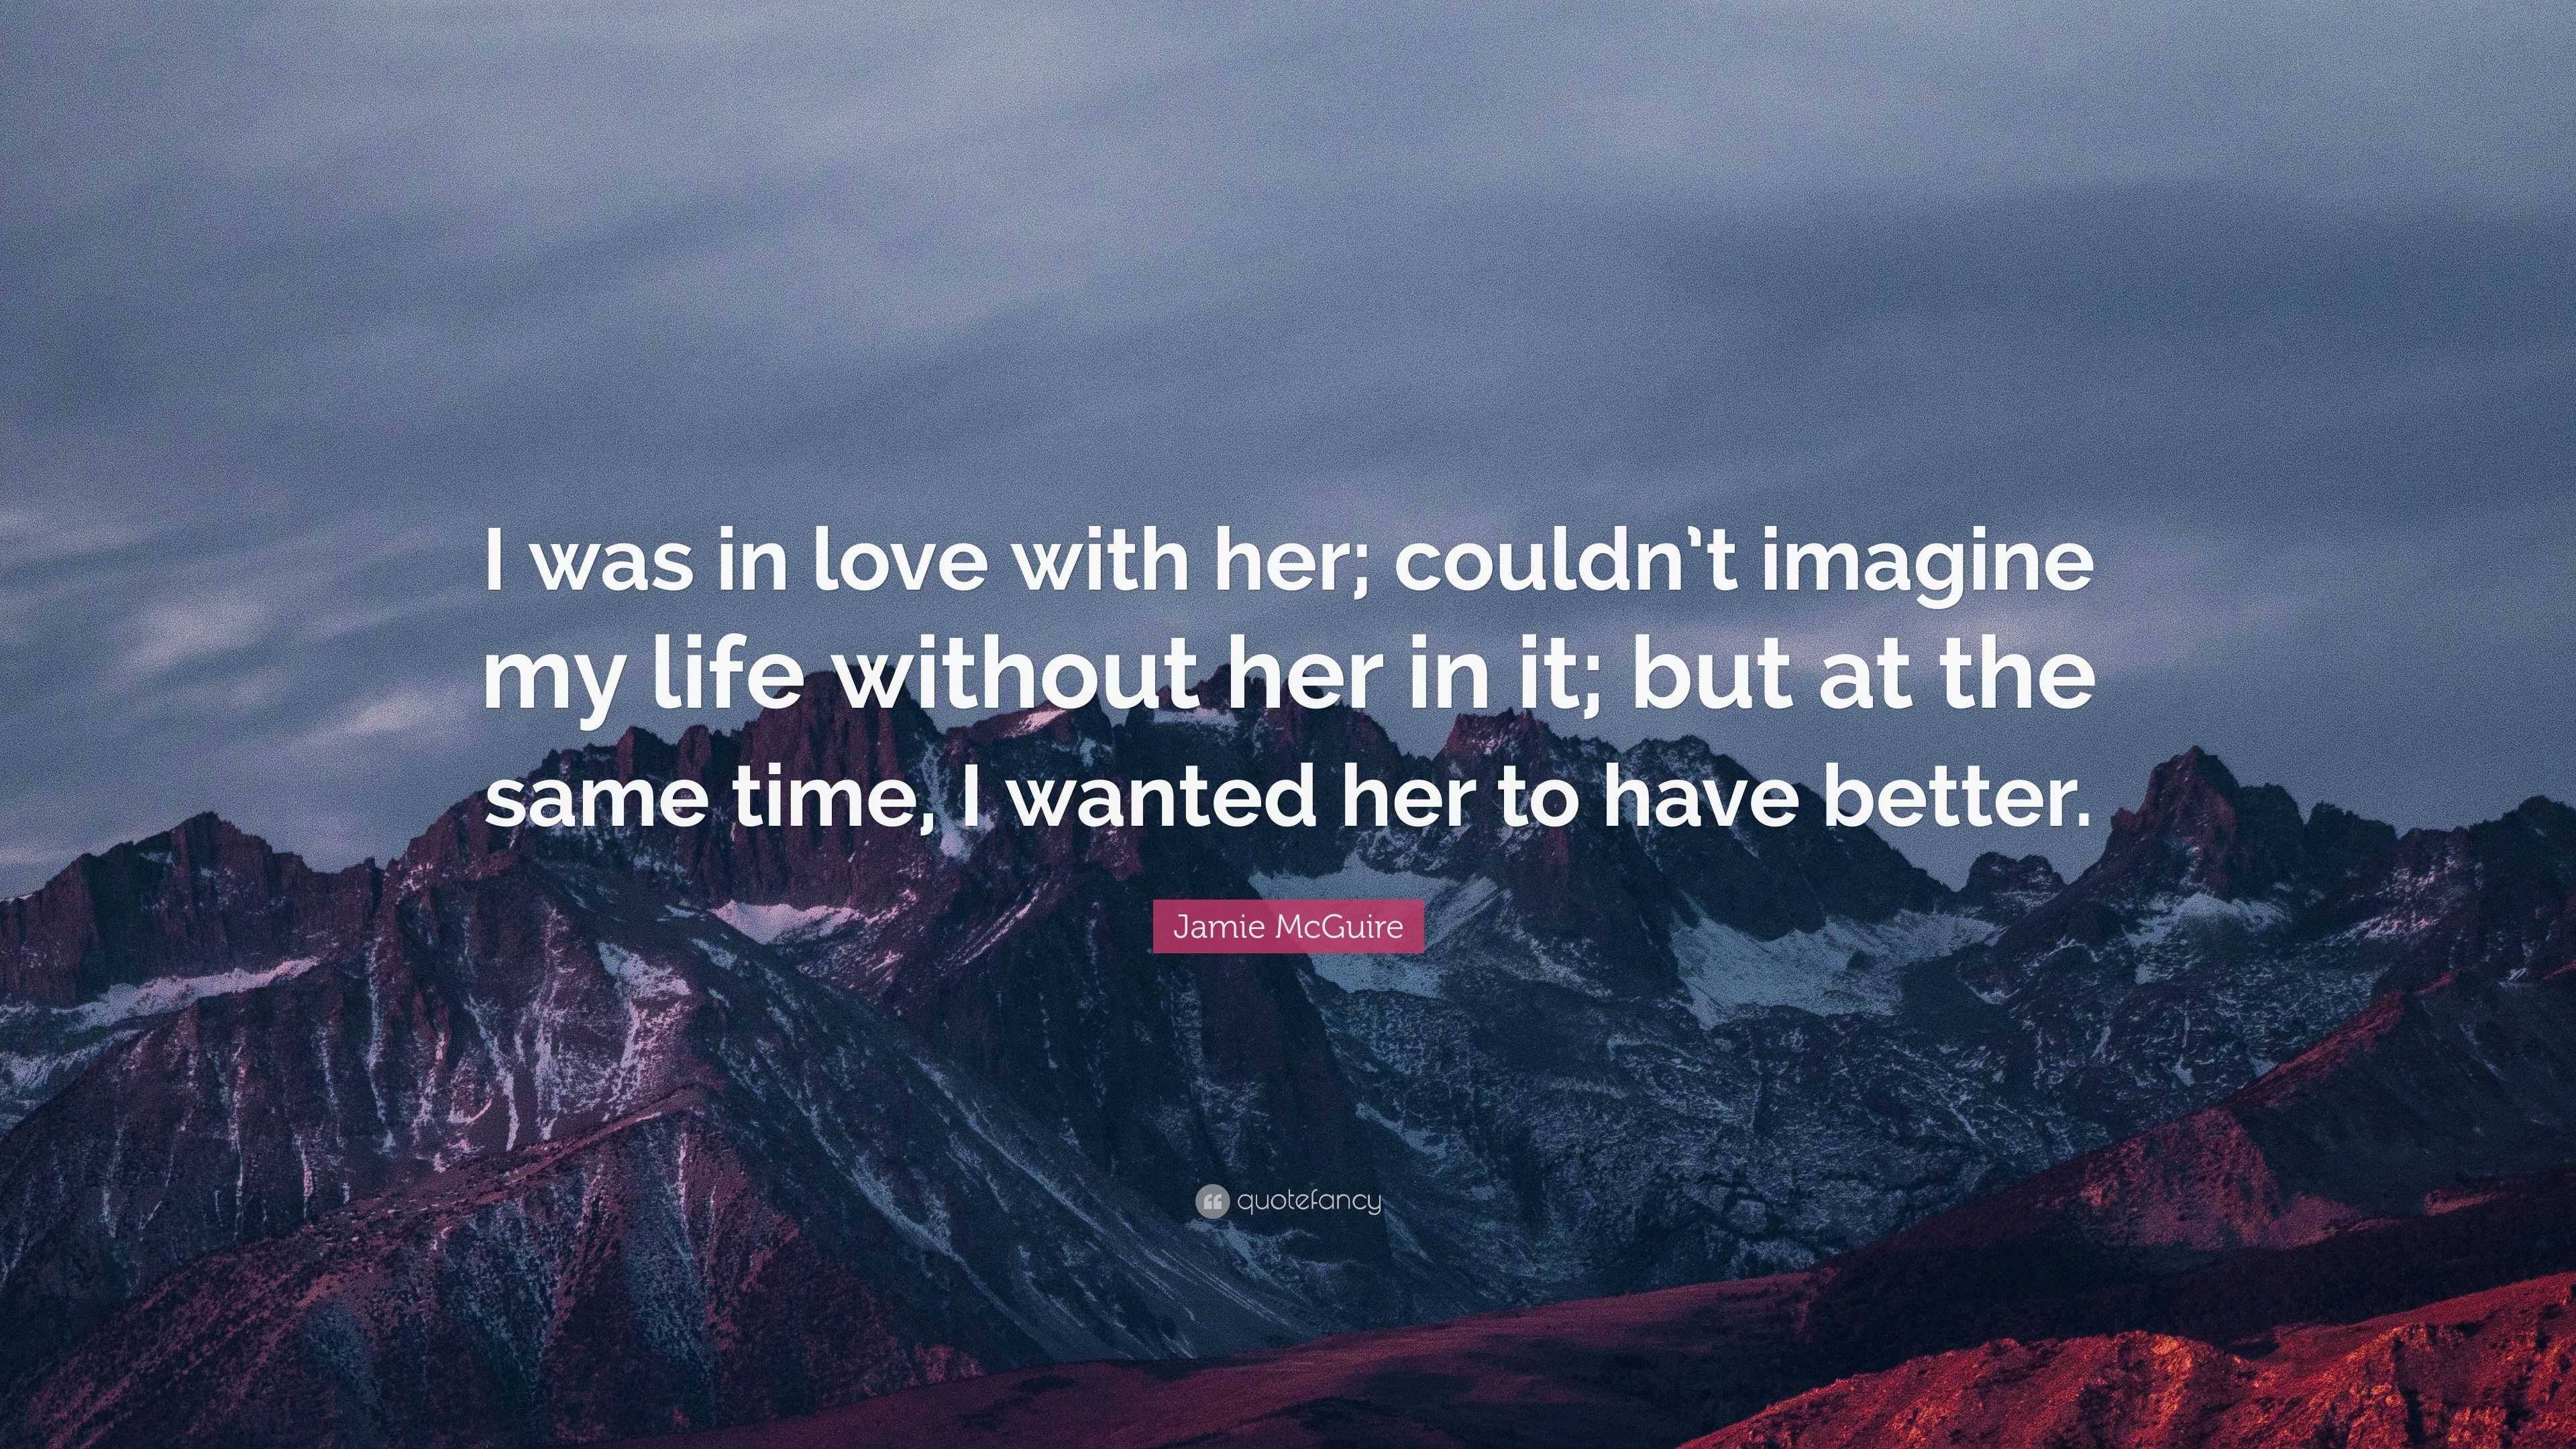 Jamie McGuire Quote “I was in love with her couldn t imagine